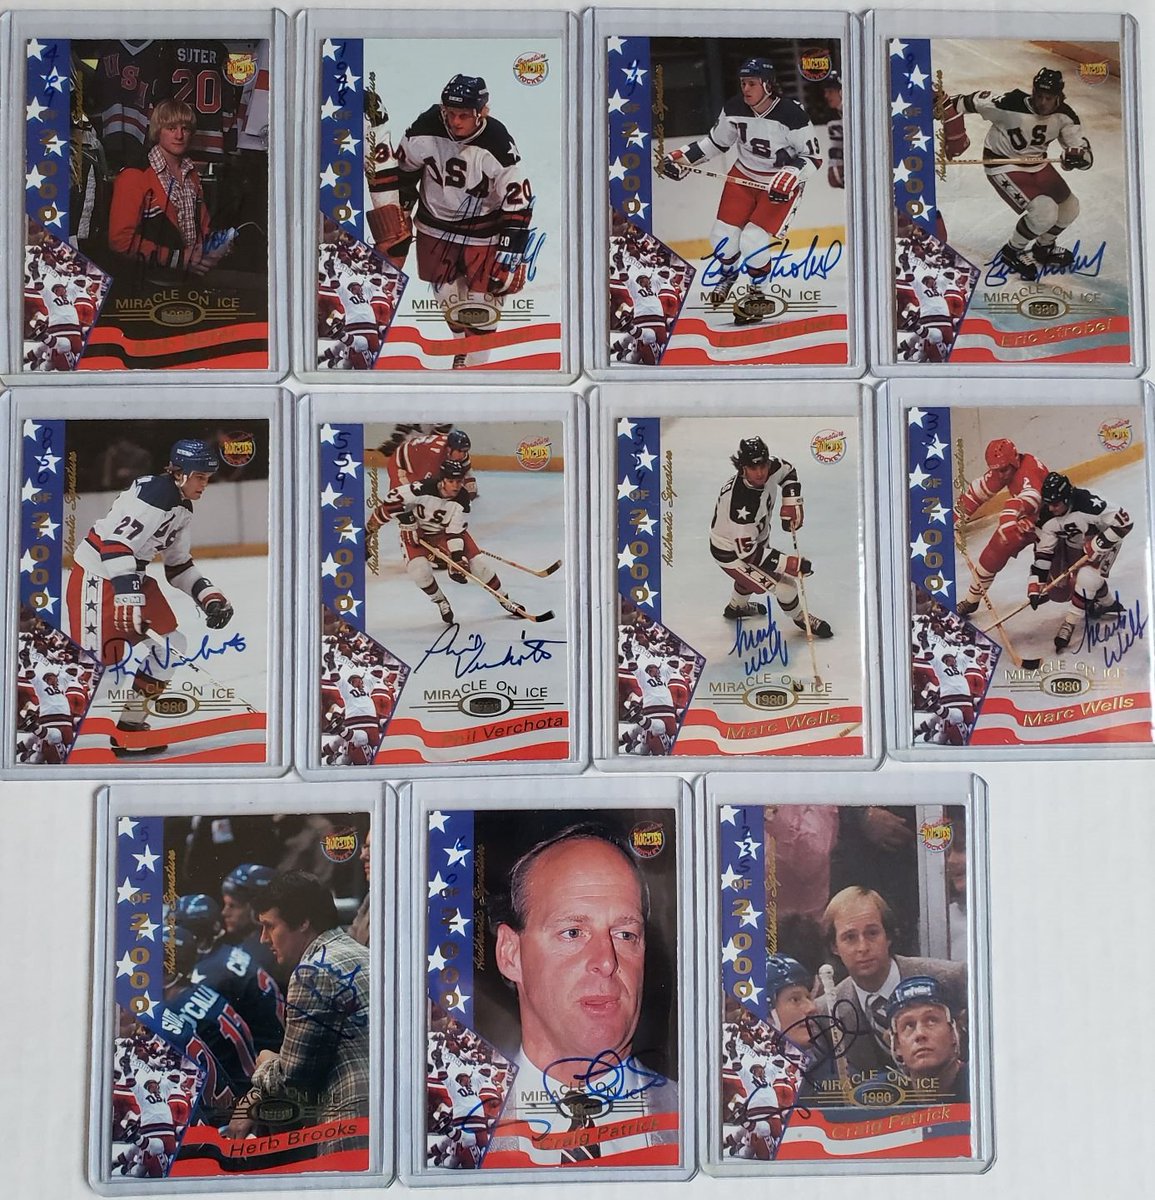 #OTD 42 years ago team #USA defeated the Soviet Union at the #LakePlacid #Olympics in what will be forever known as the #MiracleOnIce.
Here's the complete 1995 Signature Rookies autograph set as a tribute to that #1980Hockey team...